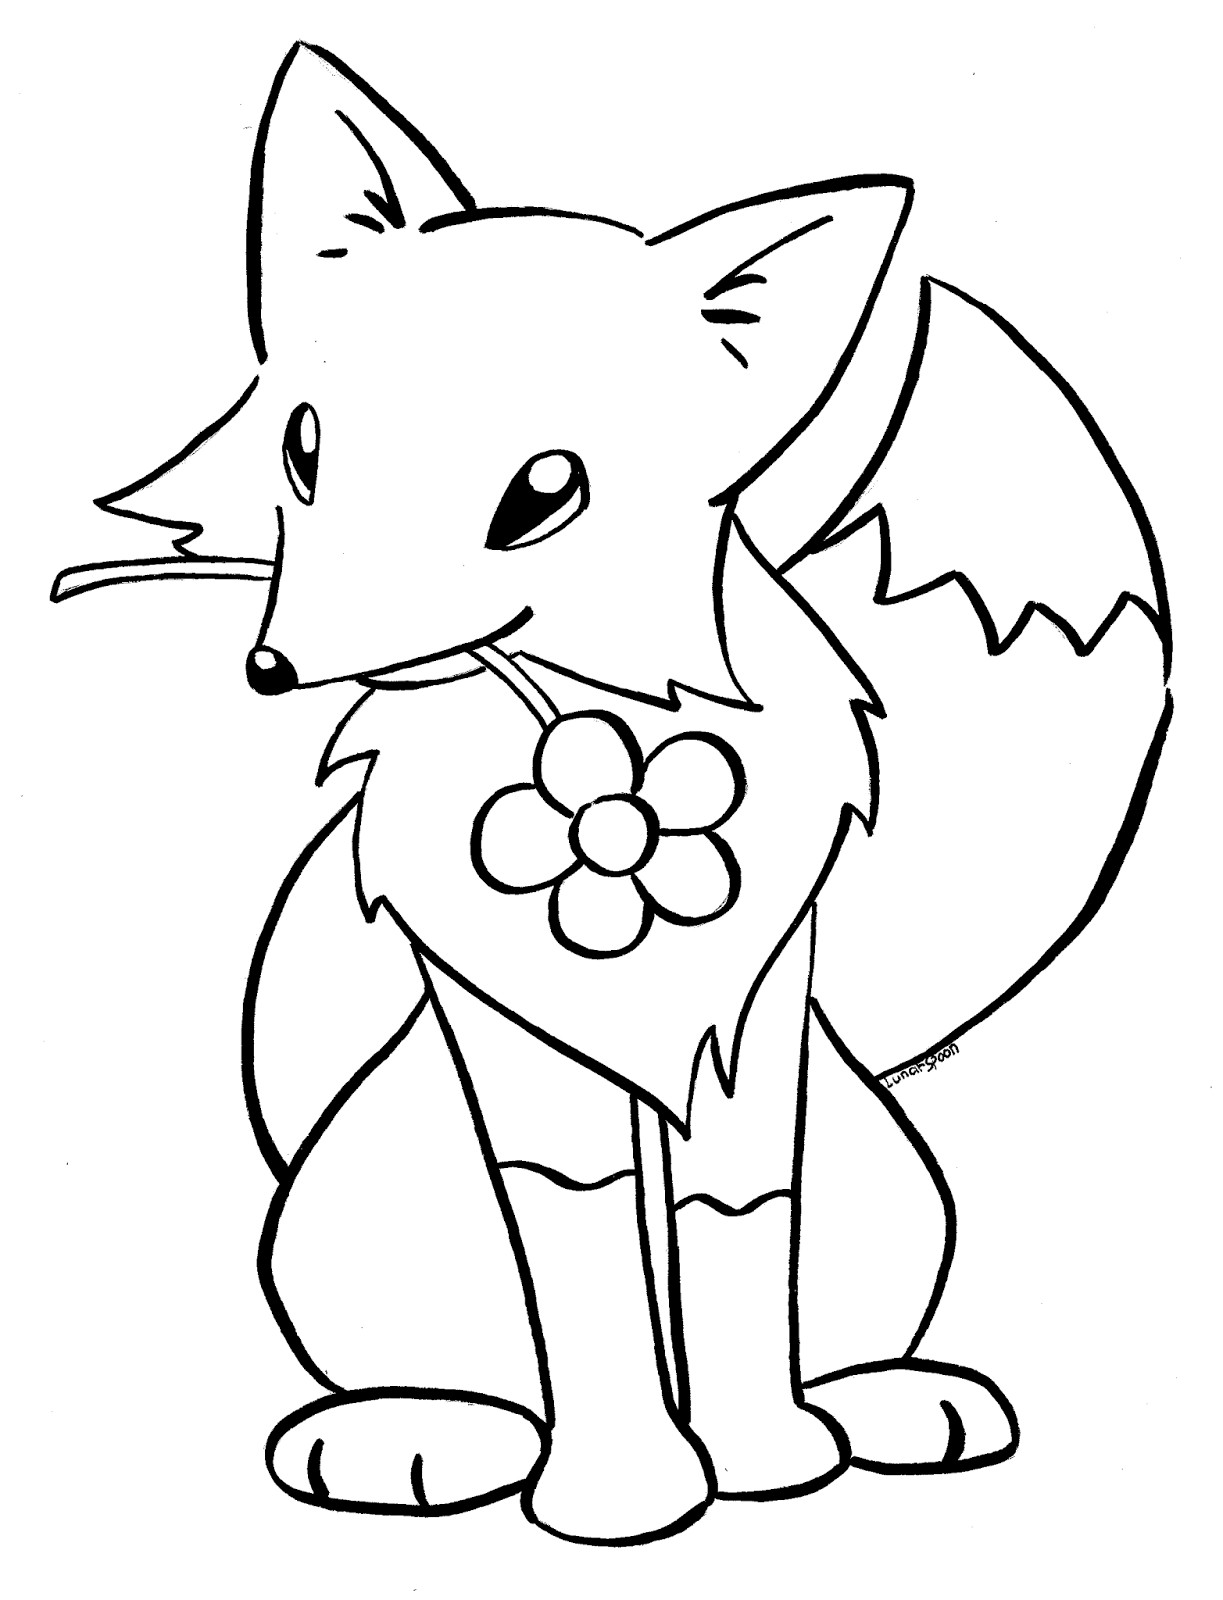 Fox Coloring Pages For Kids
 Coloring Pages Cute and Easy Coloring Pages Free and